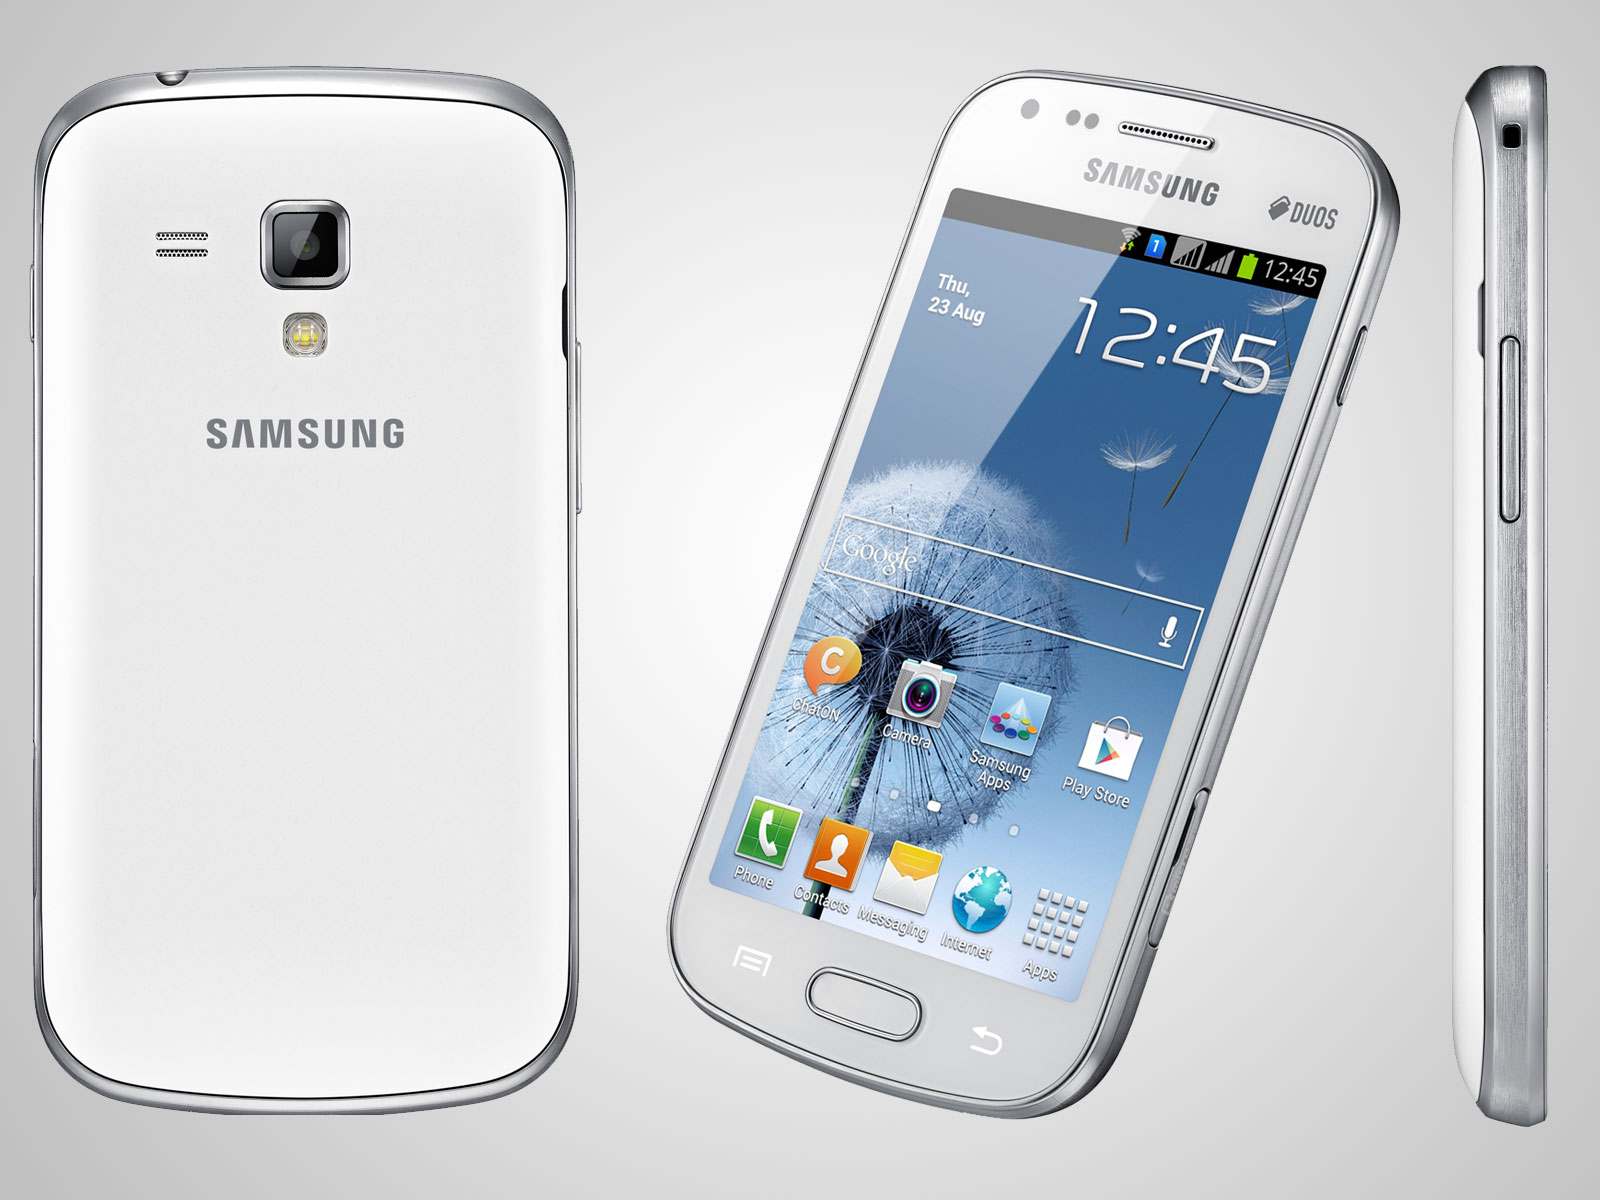 samsung duos wallpaper,mobile phone,gadget,communication device,portable communications device,smartphone